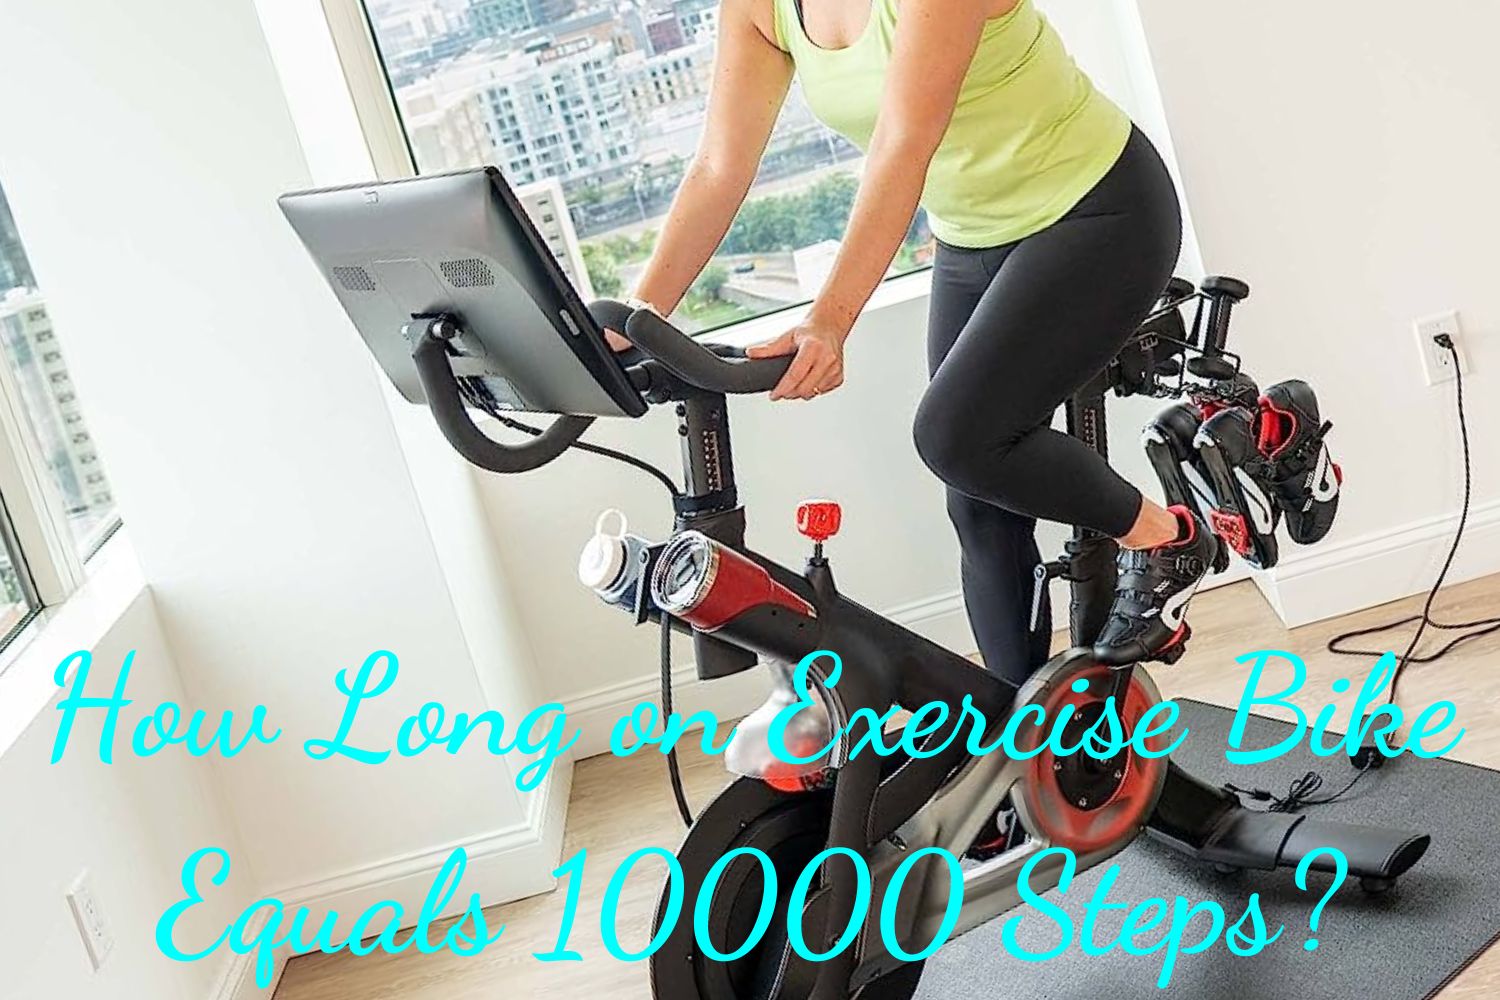 How Long on an Exercise Bike Equals 10000 Steps?